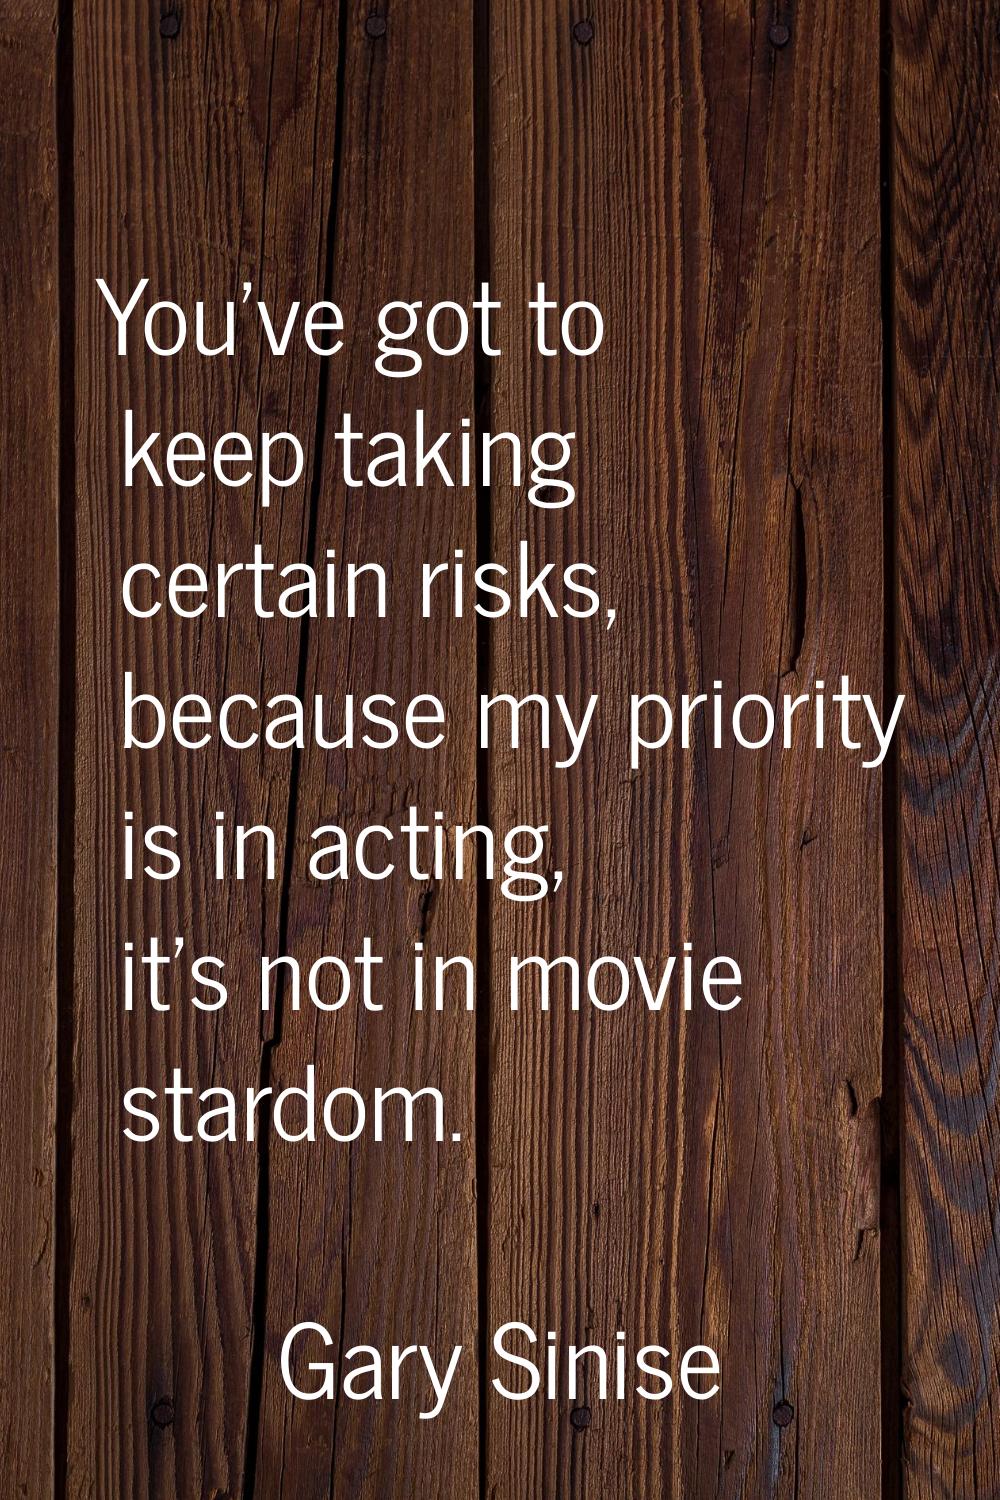 You've got to keep taking certain risks, because my priority is in acting, it's not in movie stardo